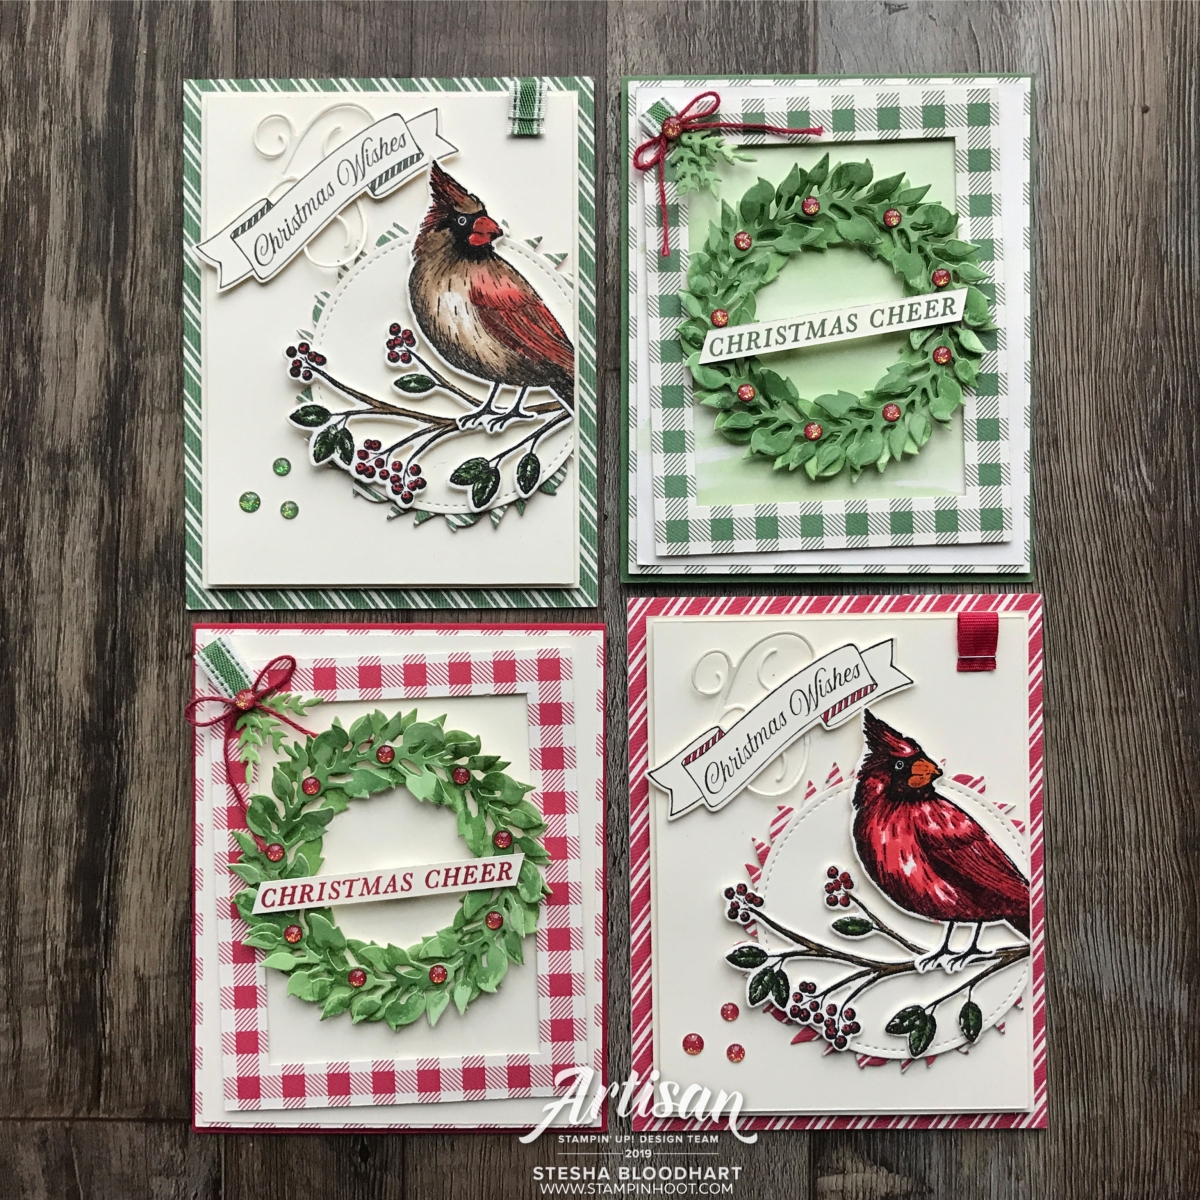 Artisan Design Team Blog Hop October 2019 - Gather Together Bundle - Scrapbook Page and Card Created by Stesha Bloodhart, Stampin' Hoot!